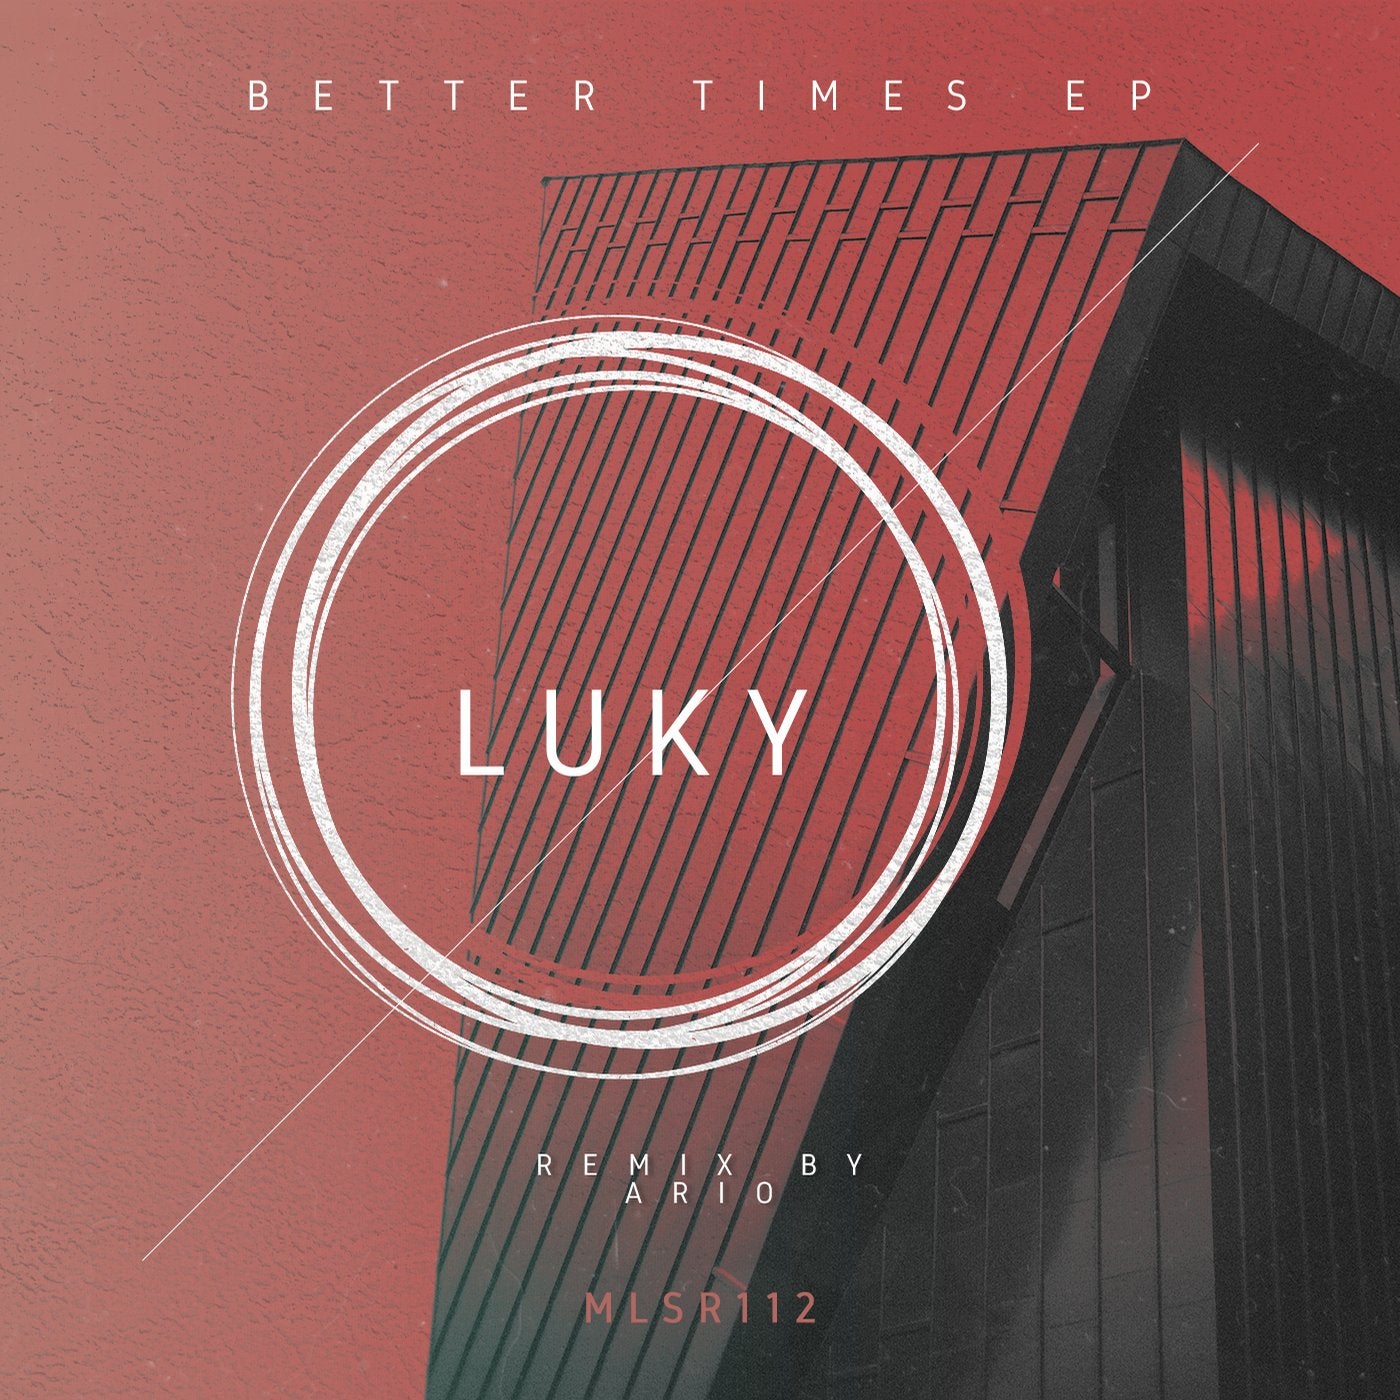 Better Times EP